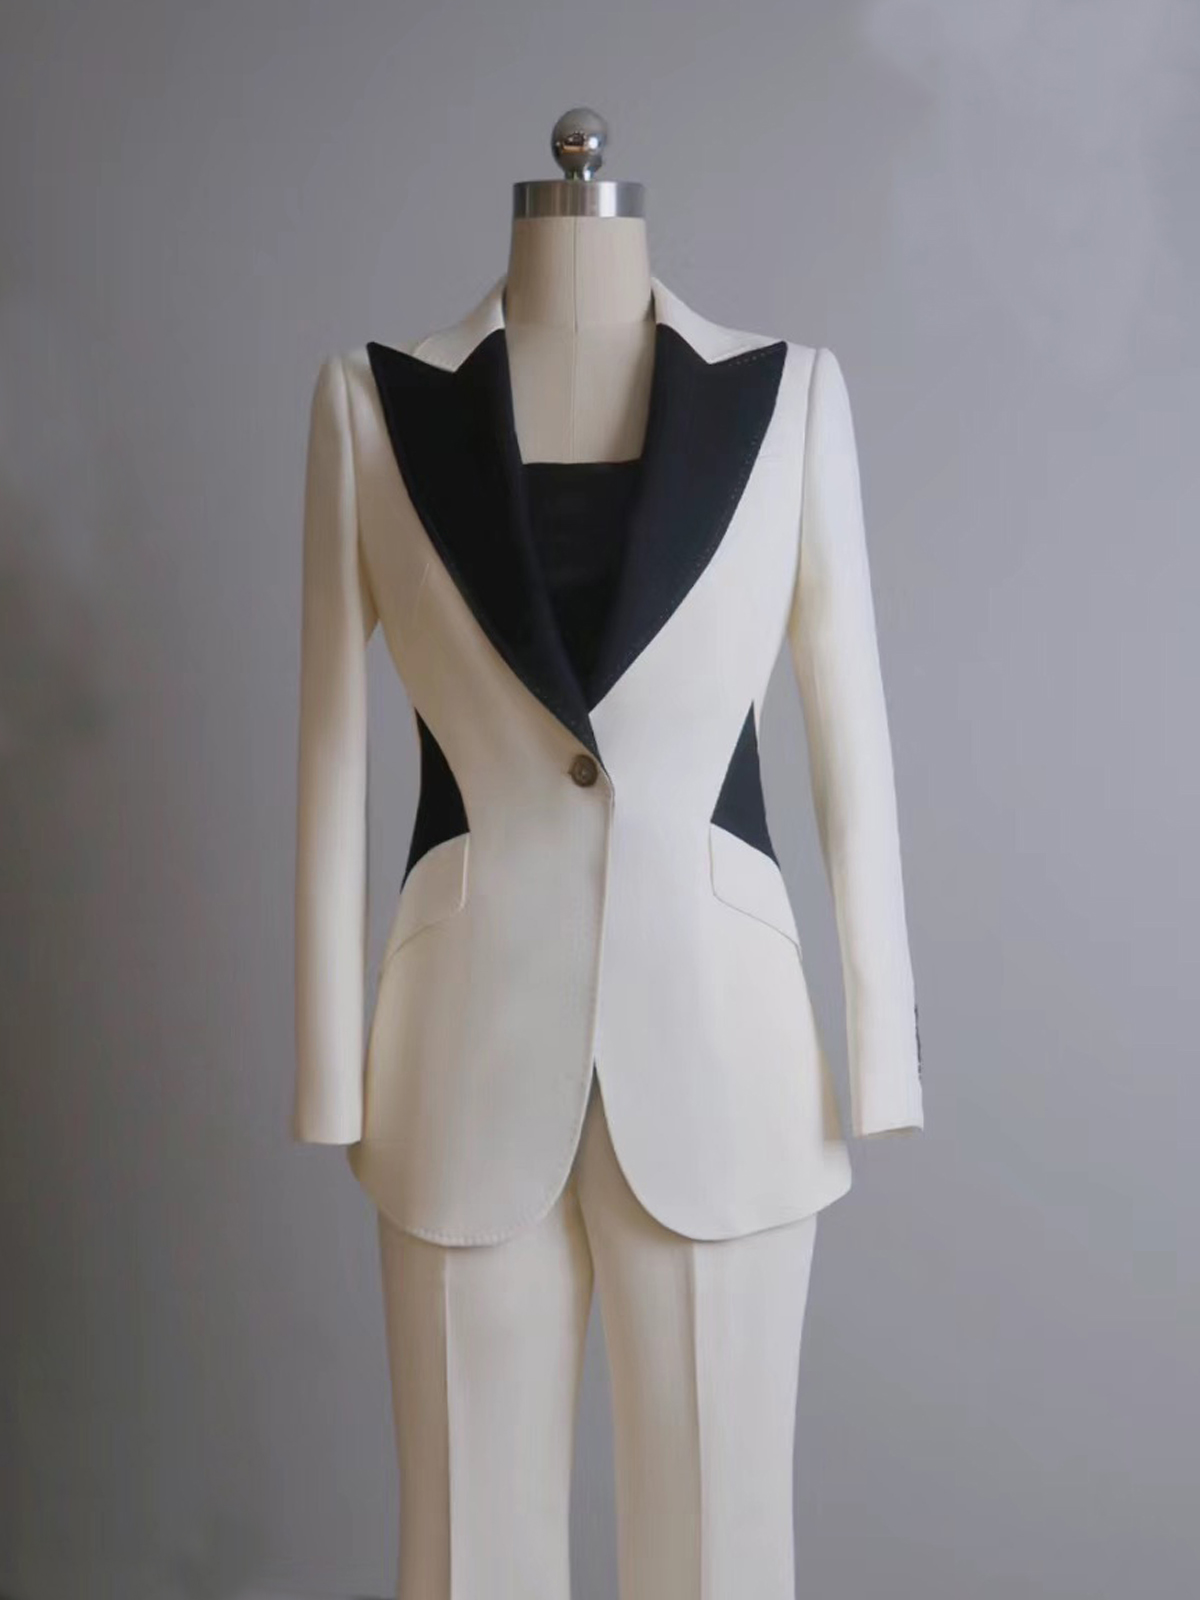 【Blue Label】Fashion Style Black and White Splicing Women's Suit